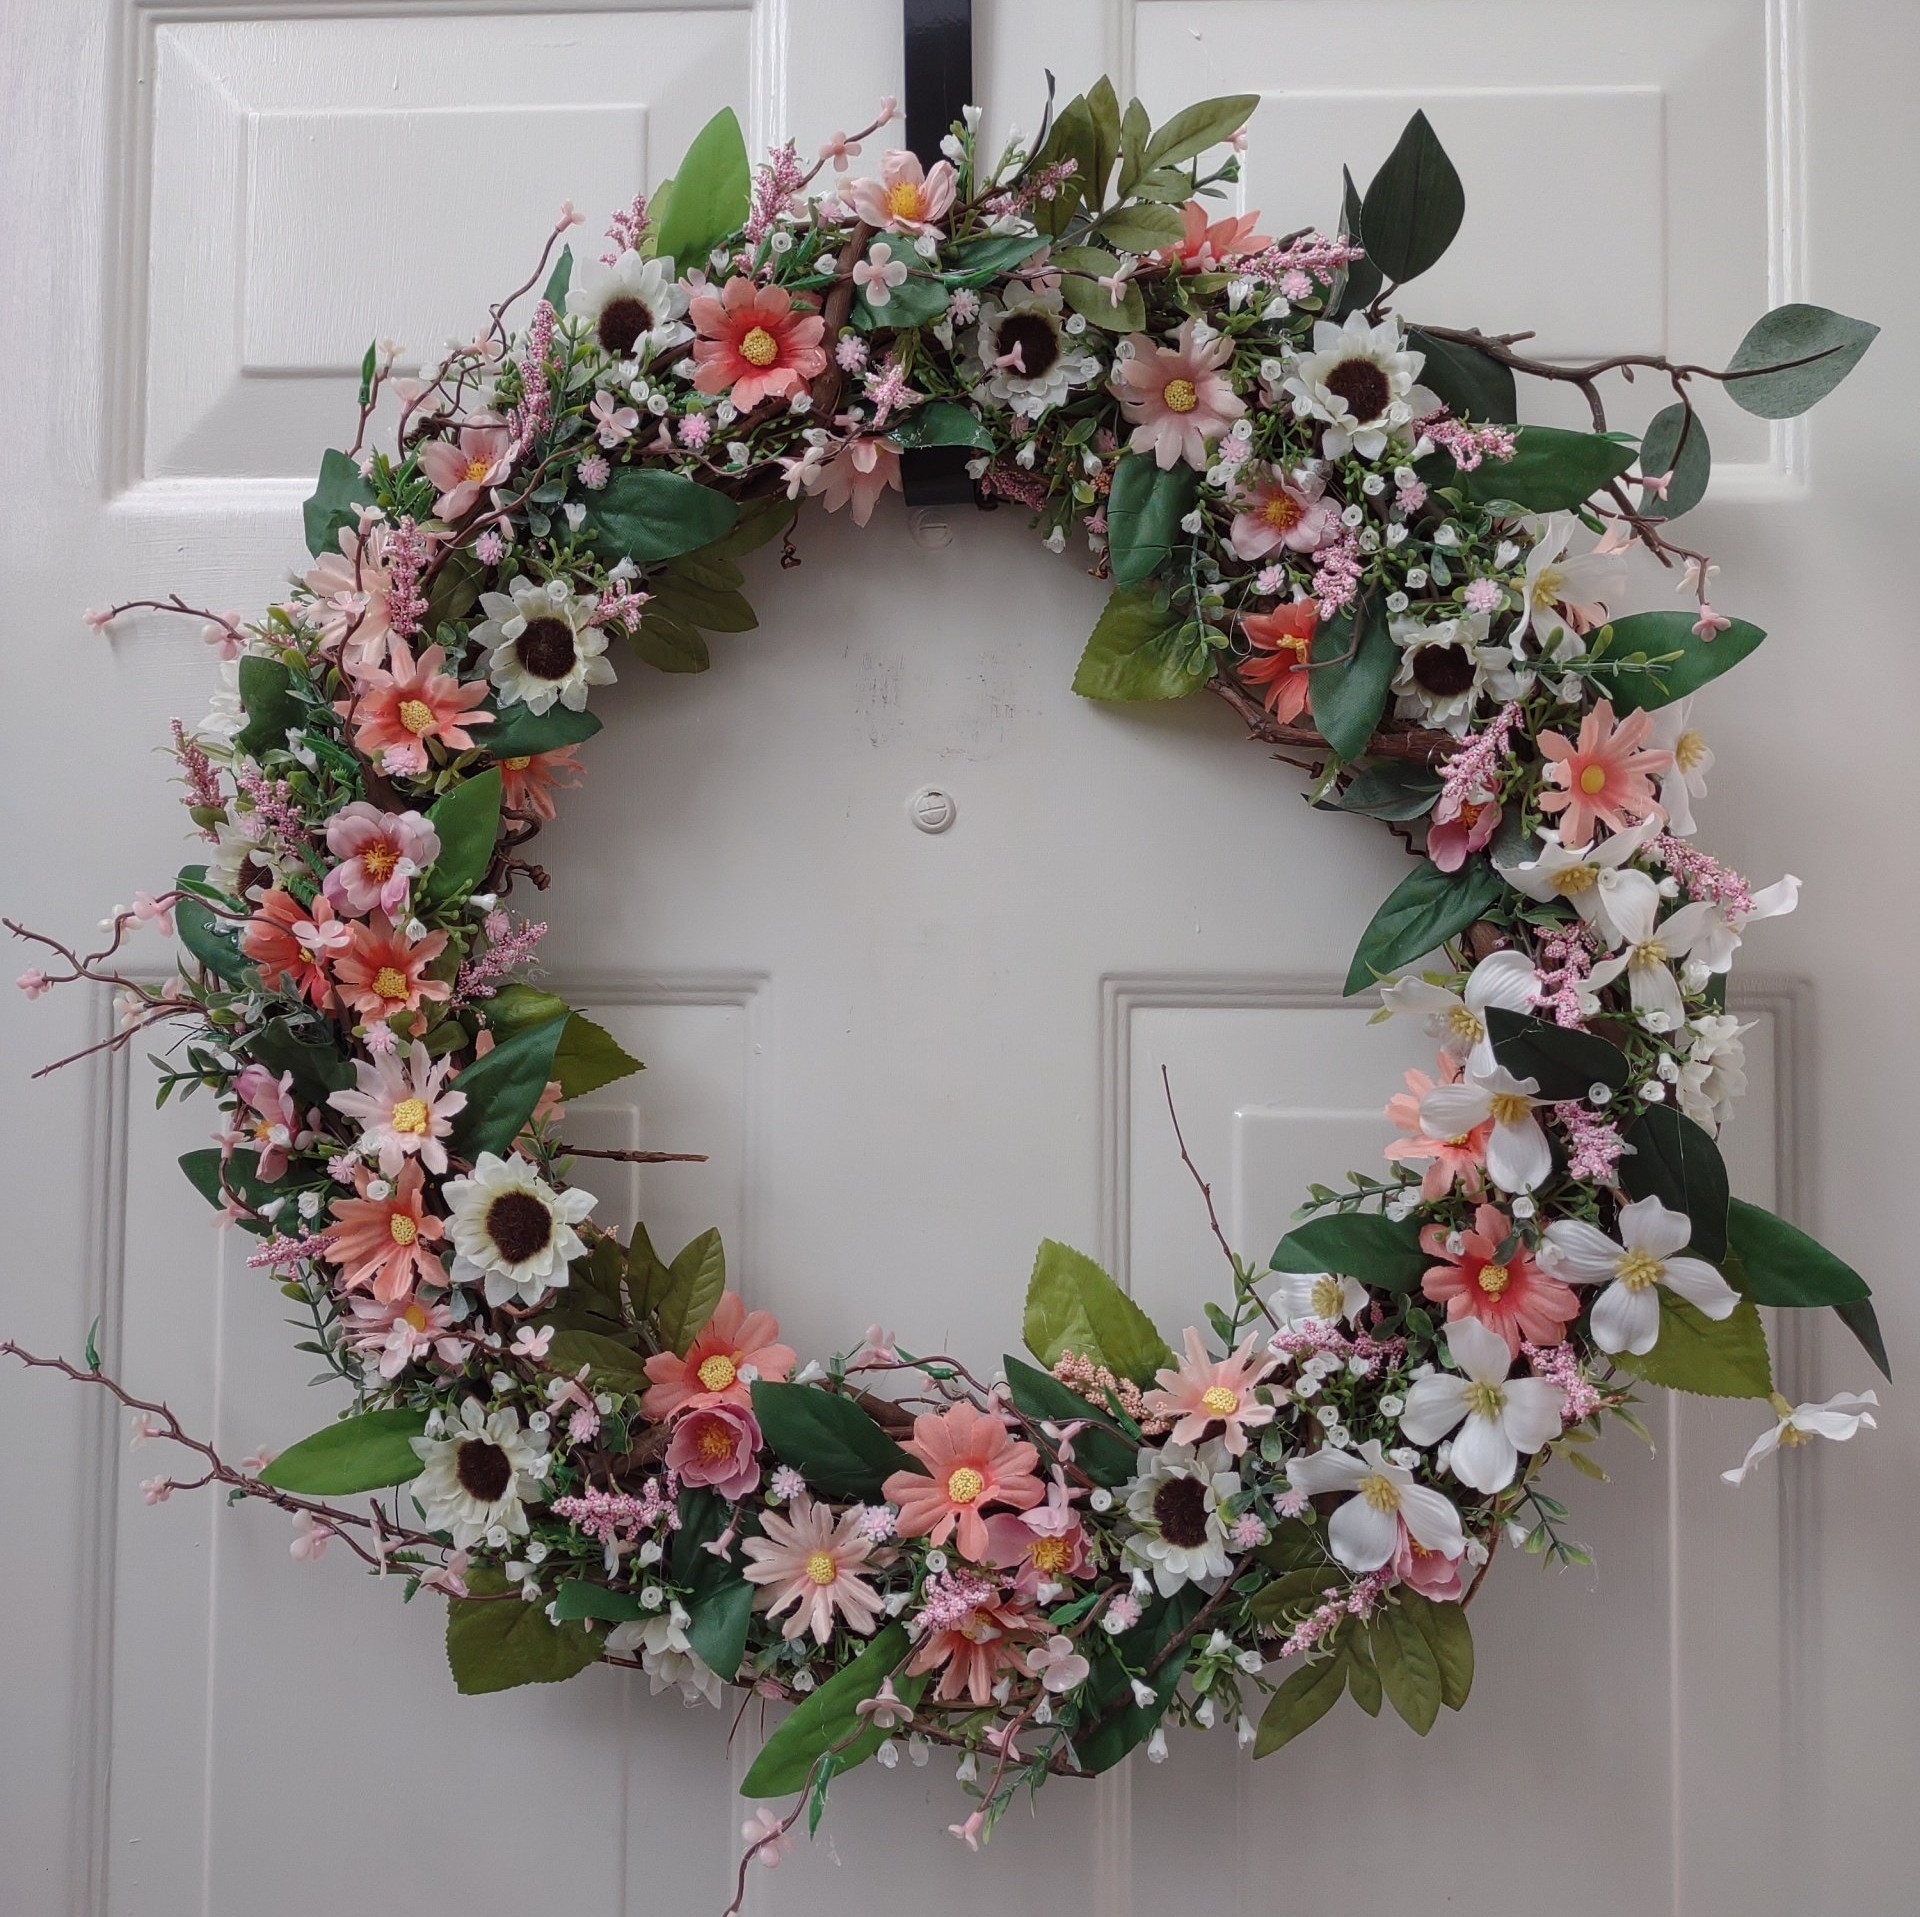 Custom Made Wreaths Different Sizes All Seasons